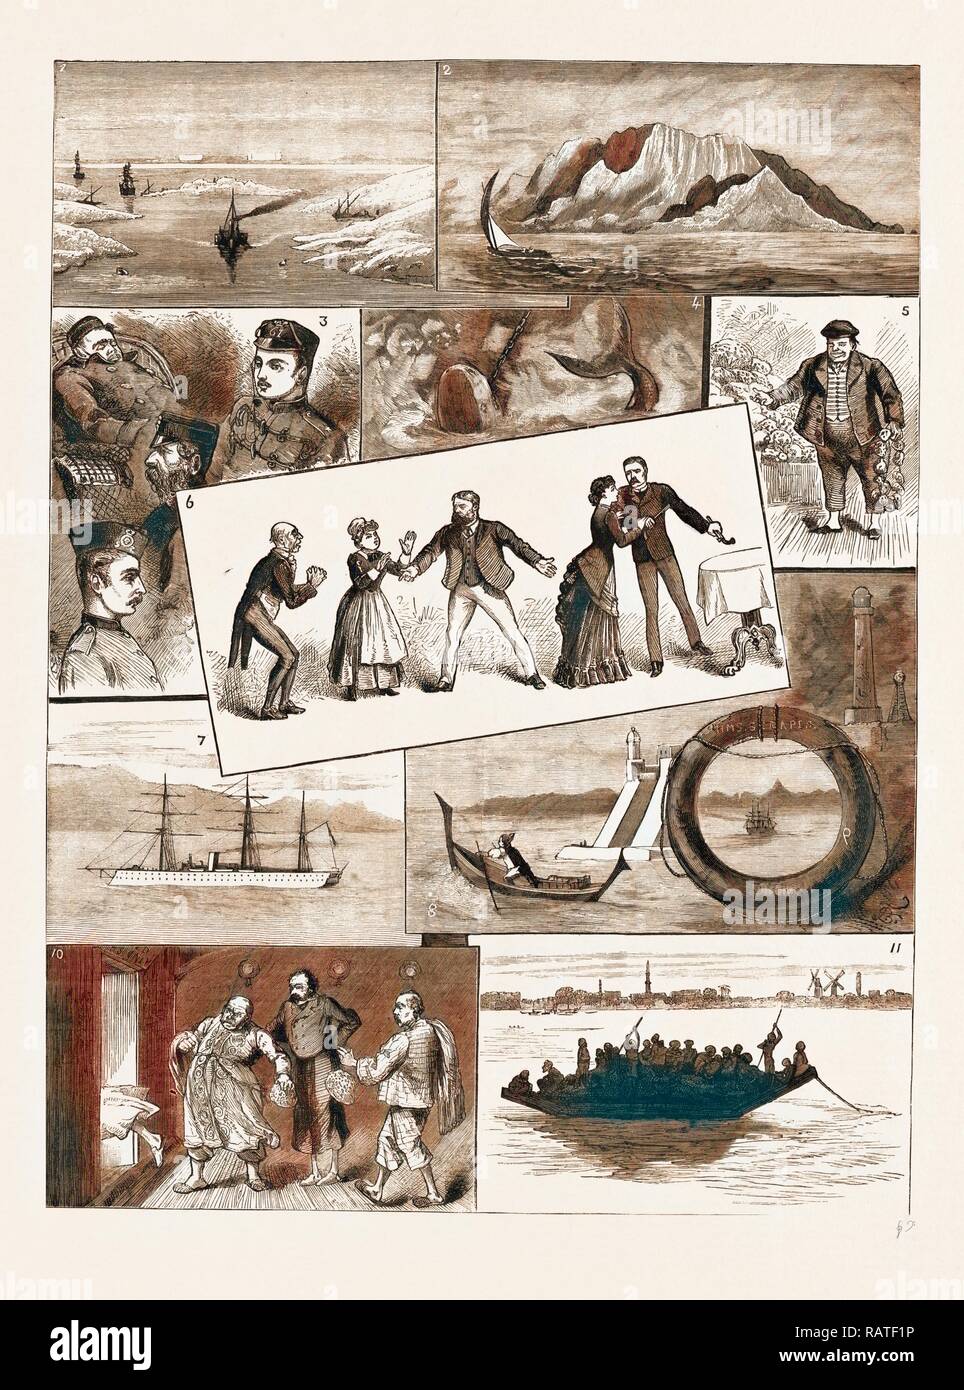 LIFE ON BOARD AN INDIAN TROOPSHIP, 1883: 1. Lake Timsah, Suez Canal. 2. Aden. 3. Some of the Passengers. 4. 'Hooked reimagined Stock Photo